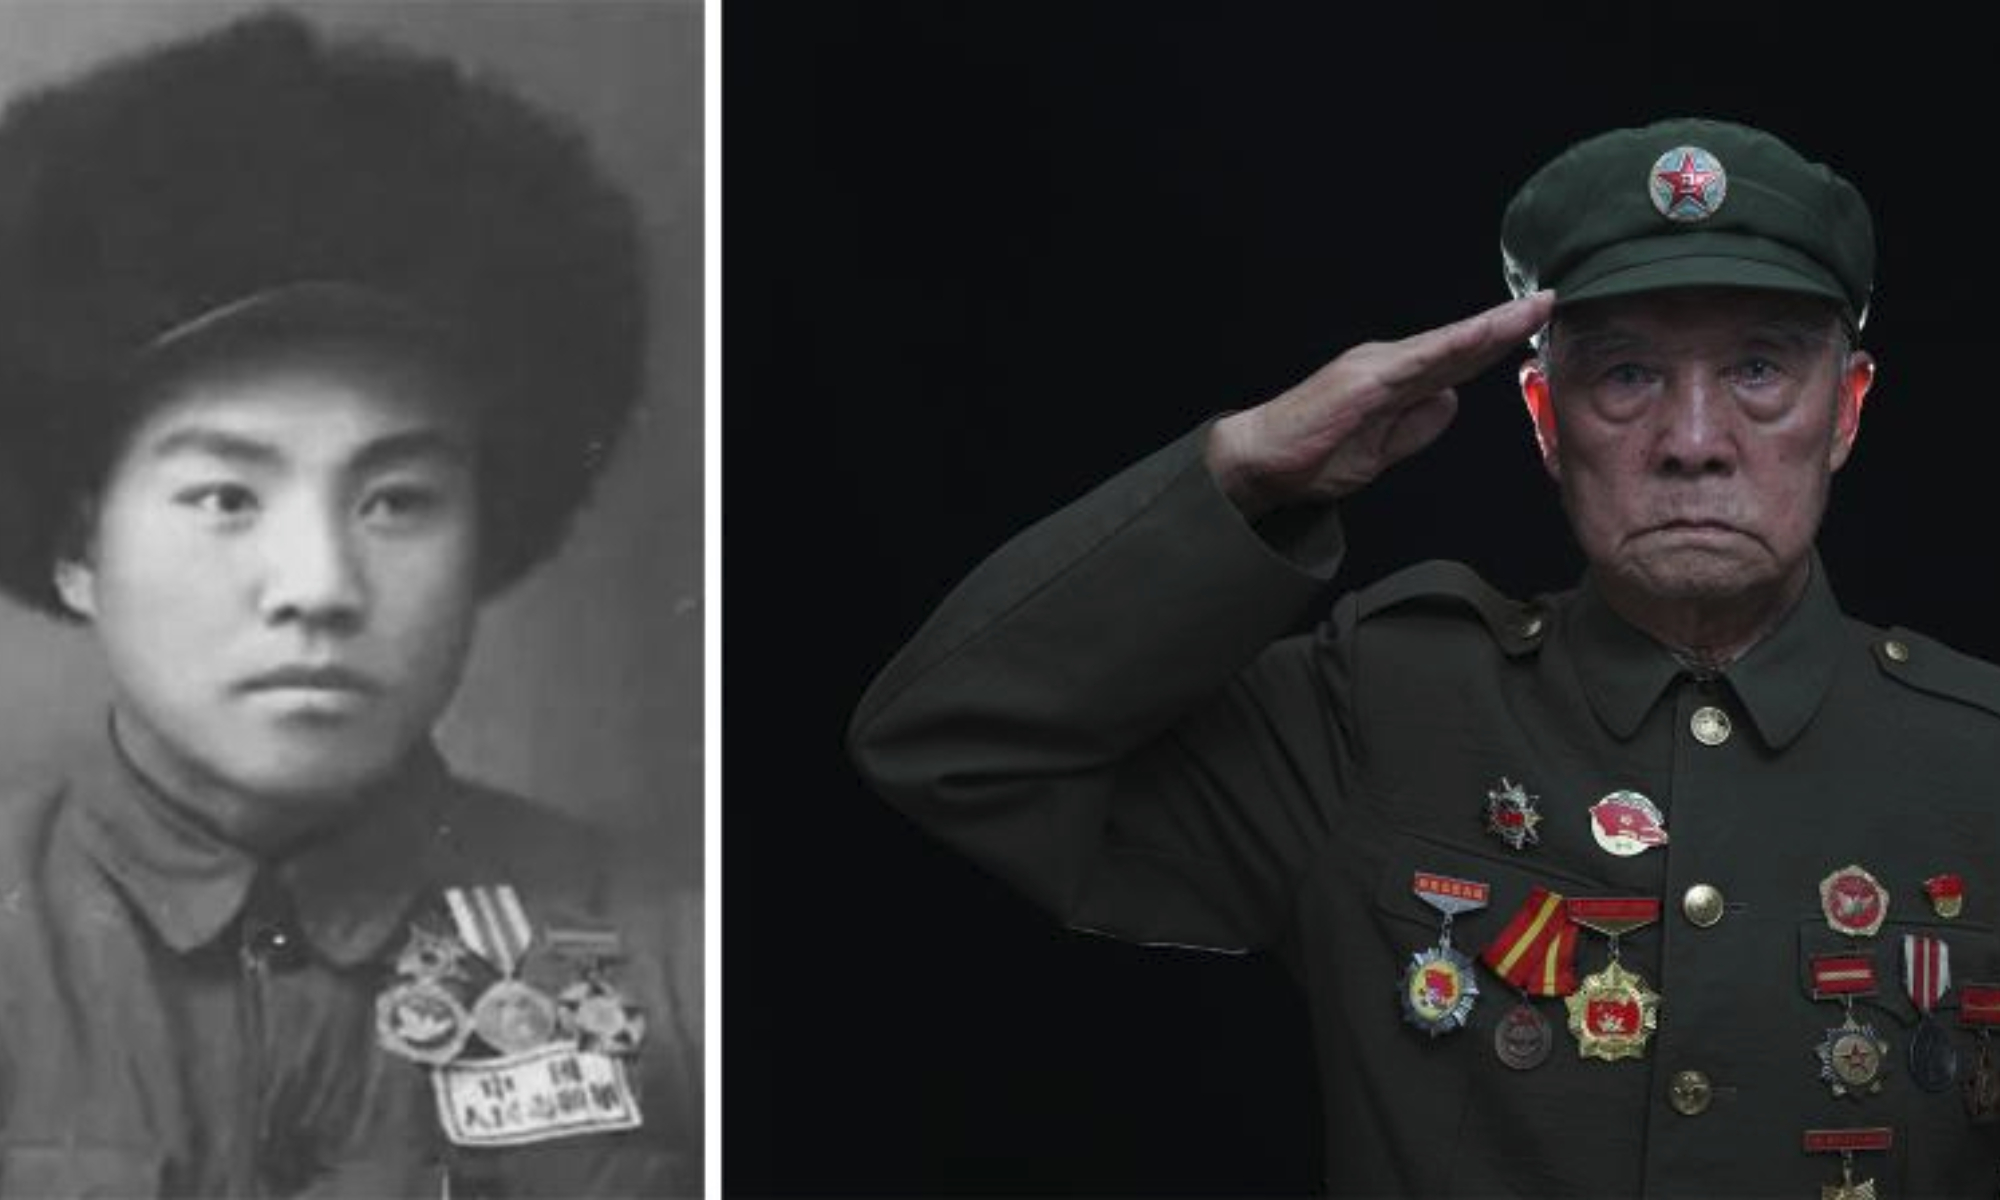 This combo photo shows the portrait of Li Weibo on July 17, 2020. Born in 1932, Li served in the artillery during the War to Resist U.S. Aggression and Aid Korea.

Seventy-three years ago, the Chinese People's Volunteers (CPV) crossed the Yalu River and fought alongside the army of the Democratic People's Republic of Korea, eventually winning the War to Resist U.S. Aggression and Aid Korea in 1953.